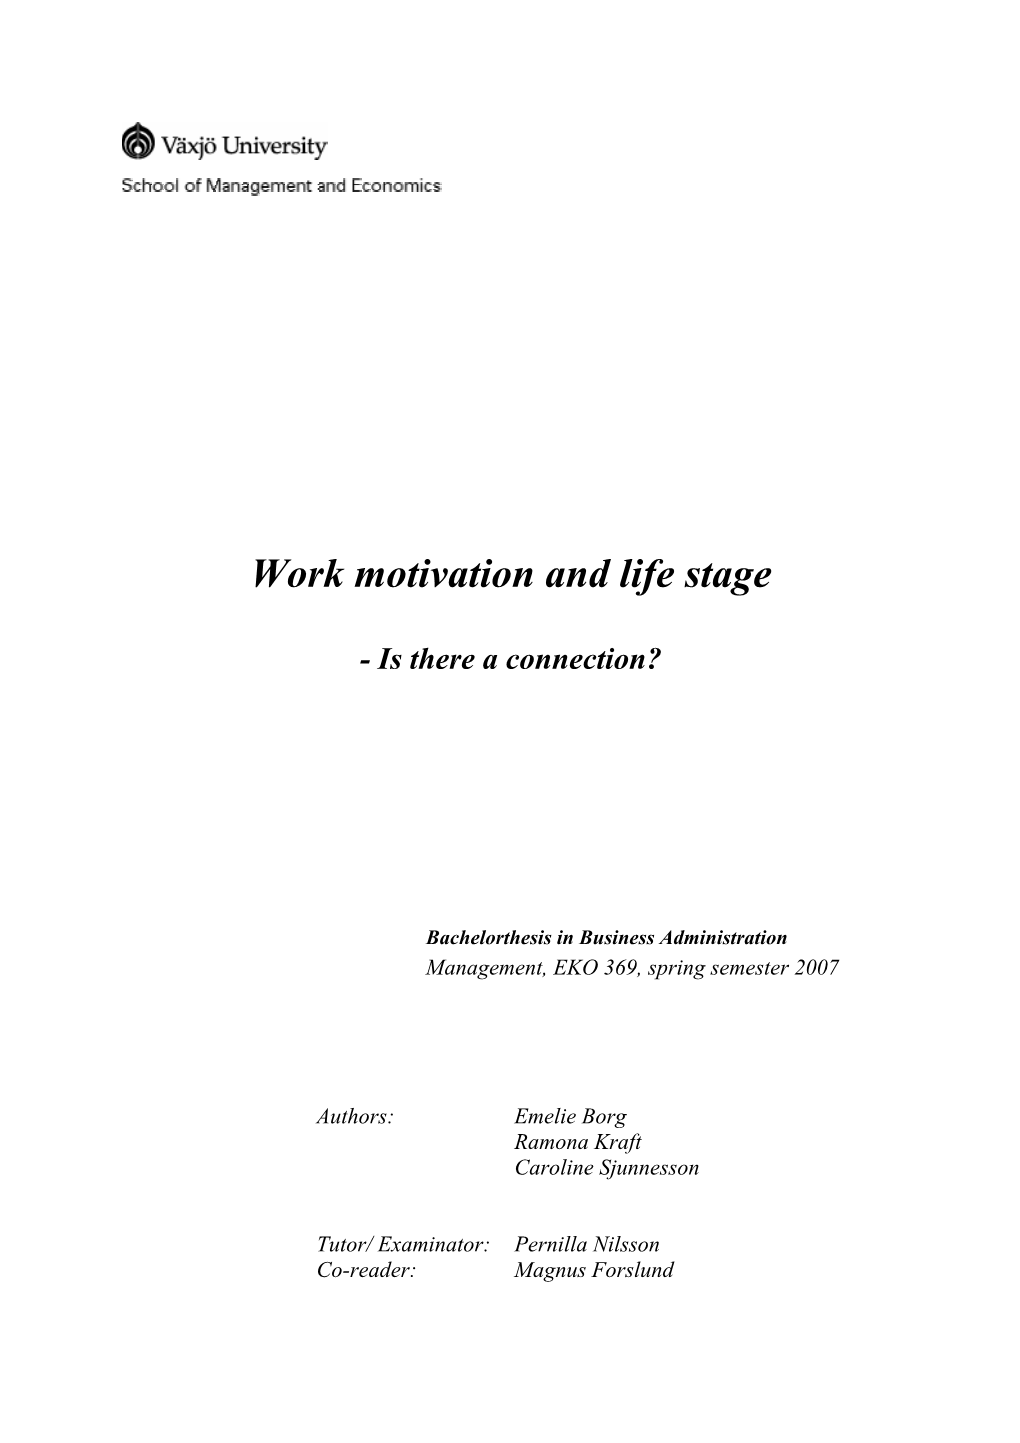 Work Motivation and Life Stage